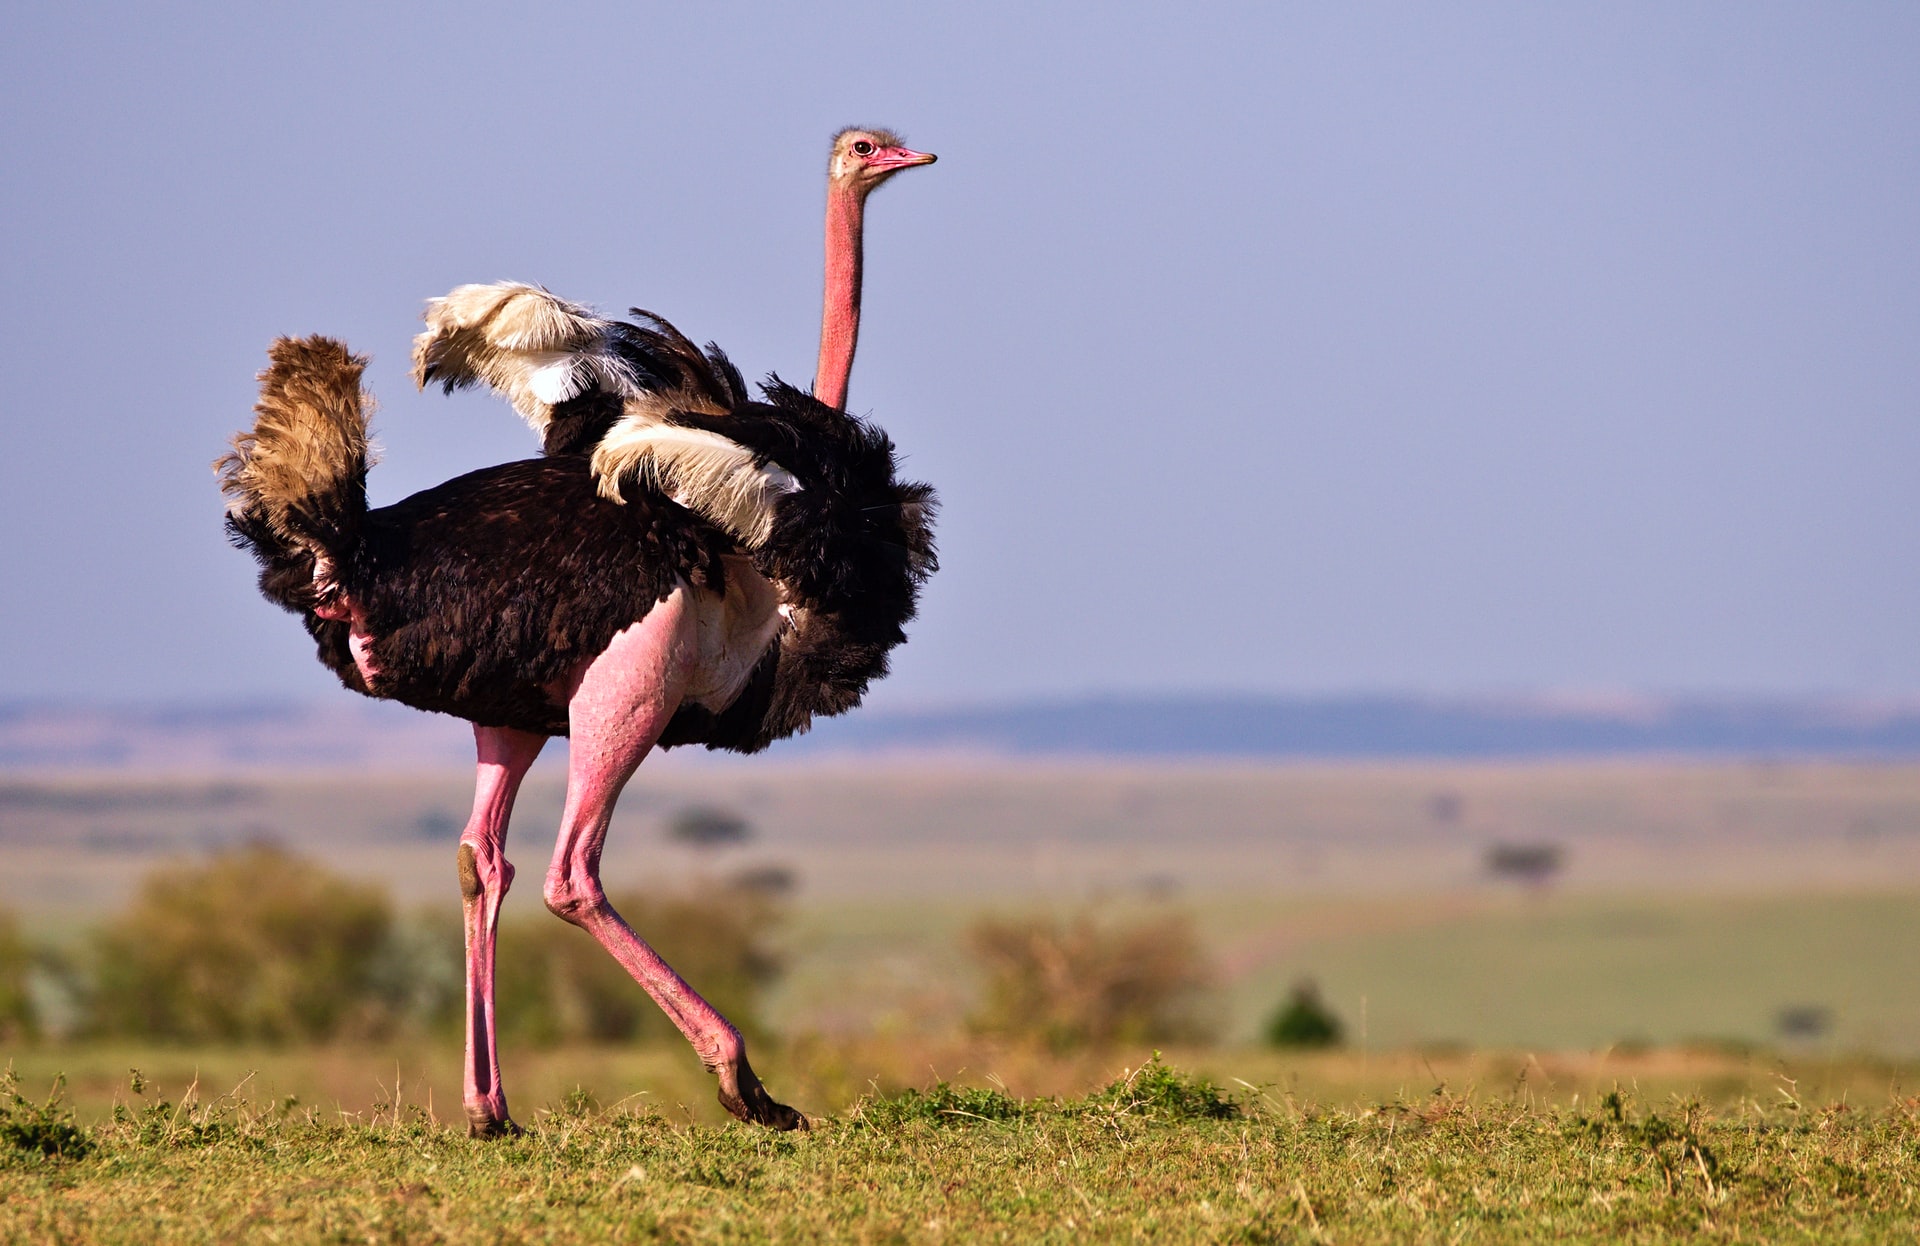 40 Most Amazing Fun Facts About Ostrich You Need To Know